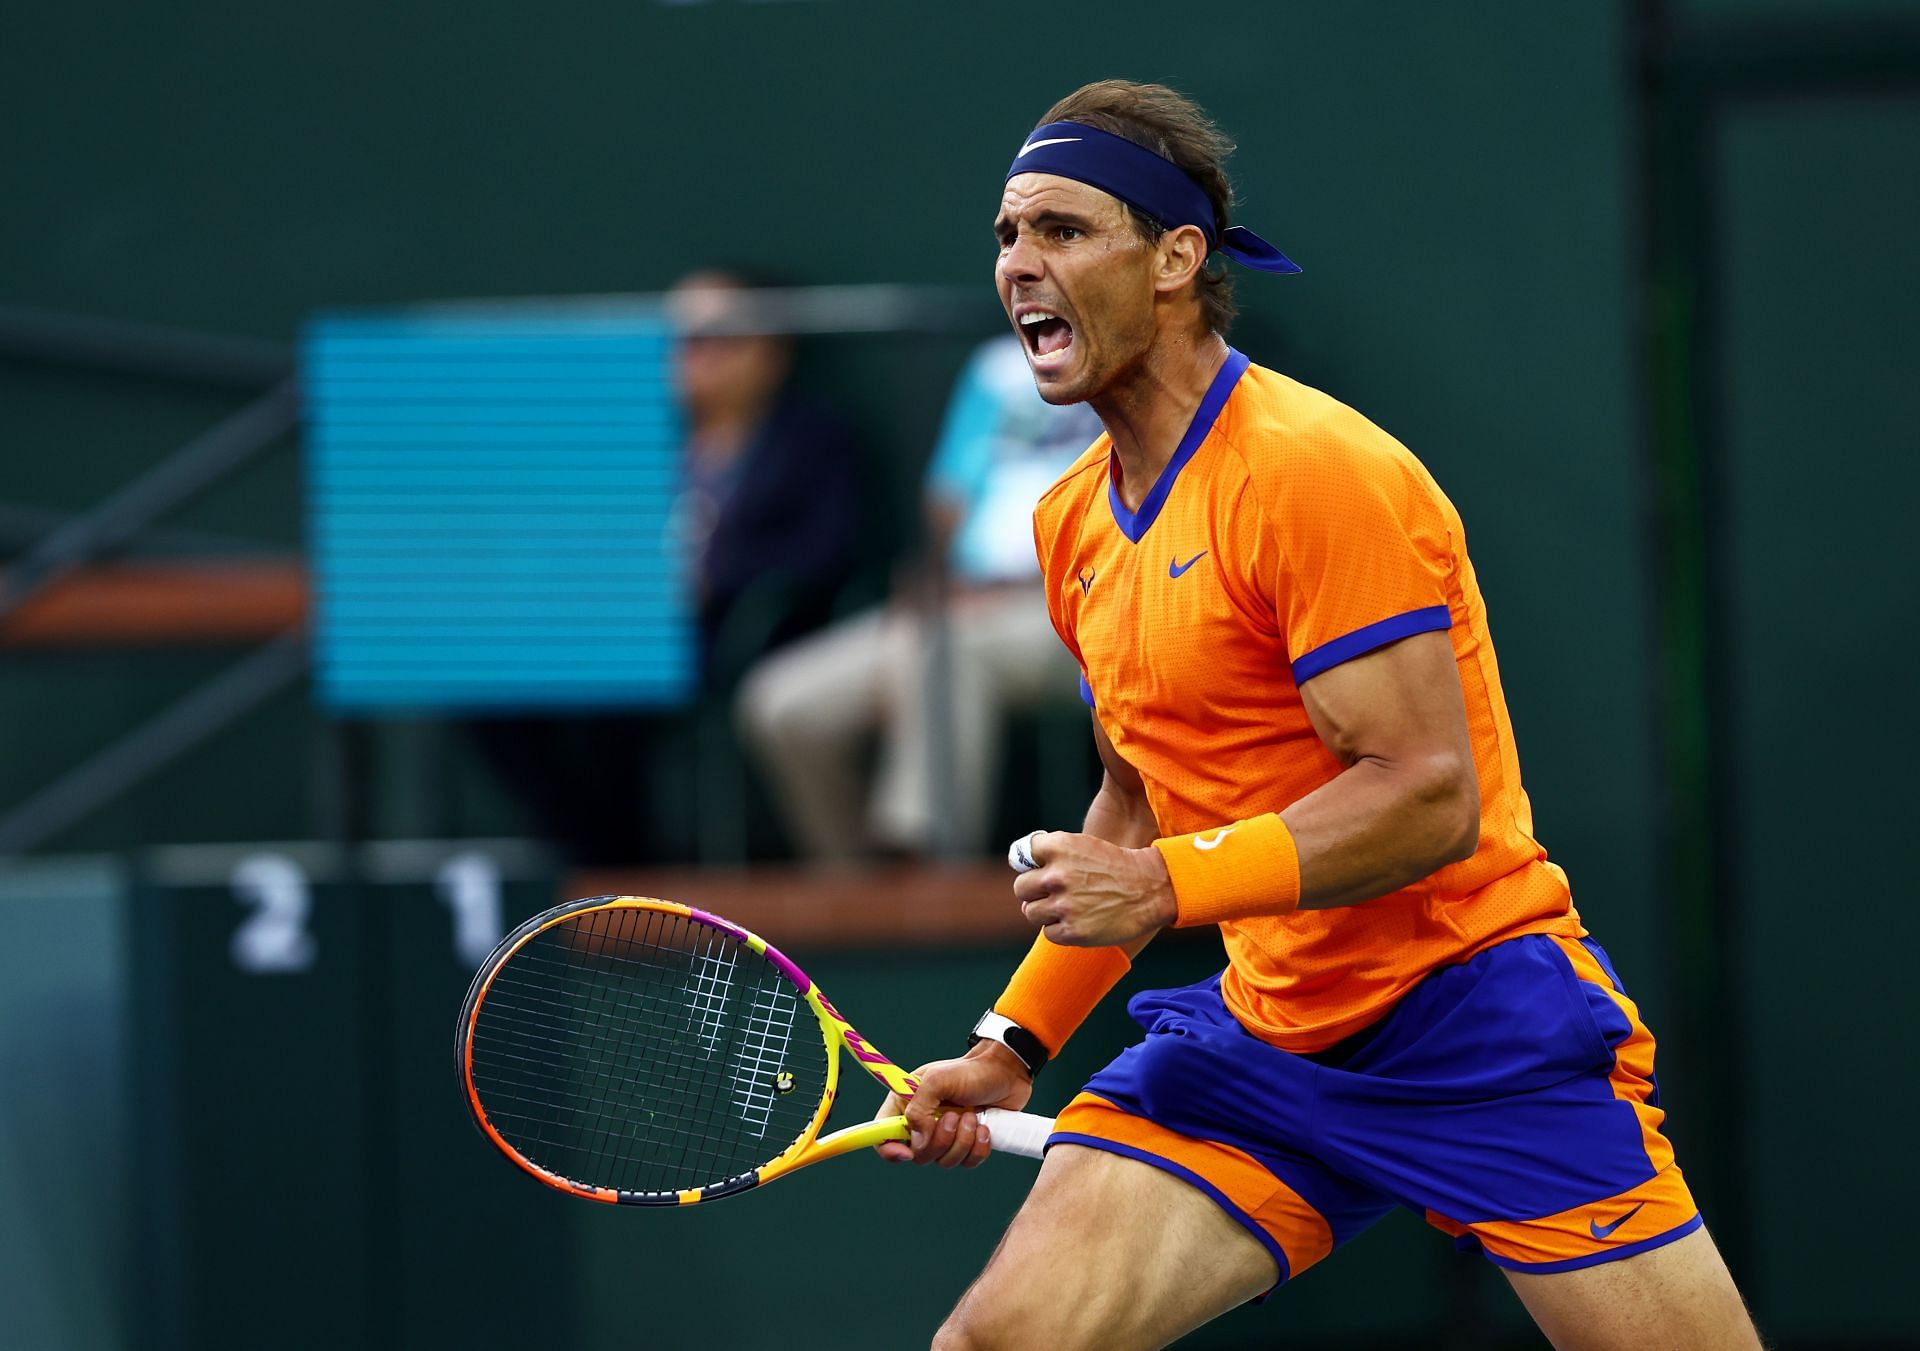 Rafael Nadal celebrates a point during his semifinal at the BNP Paribas Open on Saturday